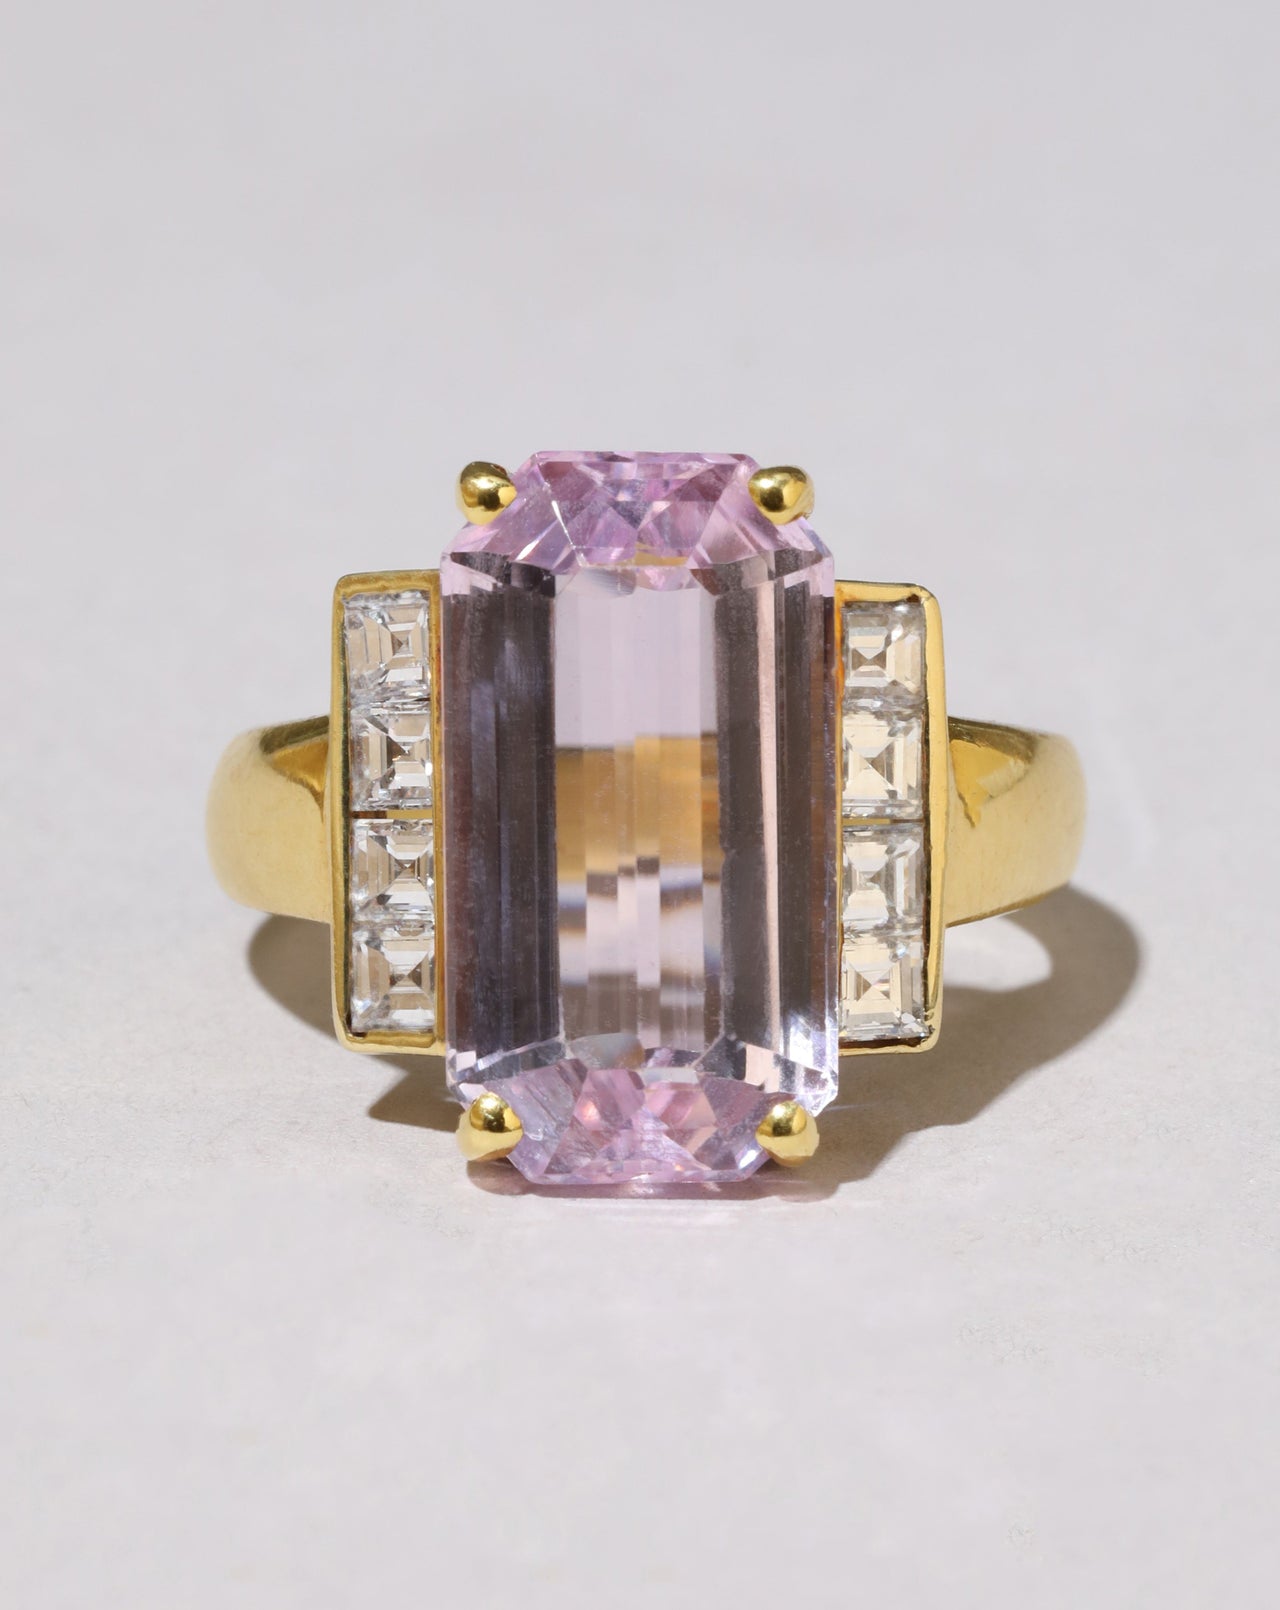 Vintage 18k Gold and Kunzite Ring with Diamonds - Photo 2